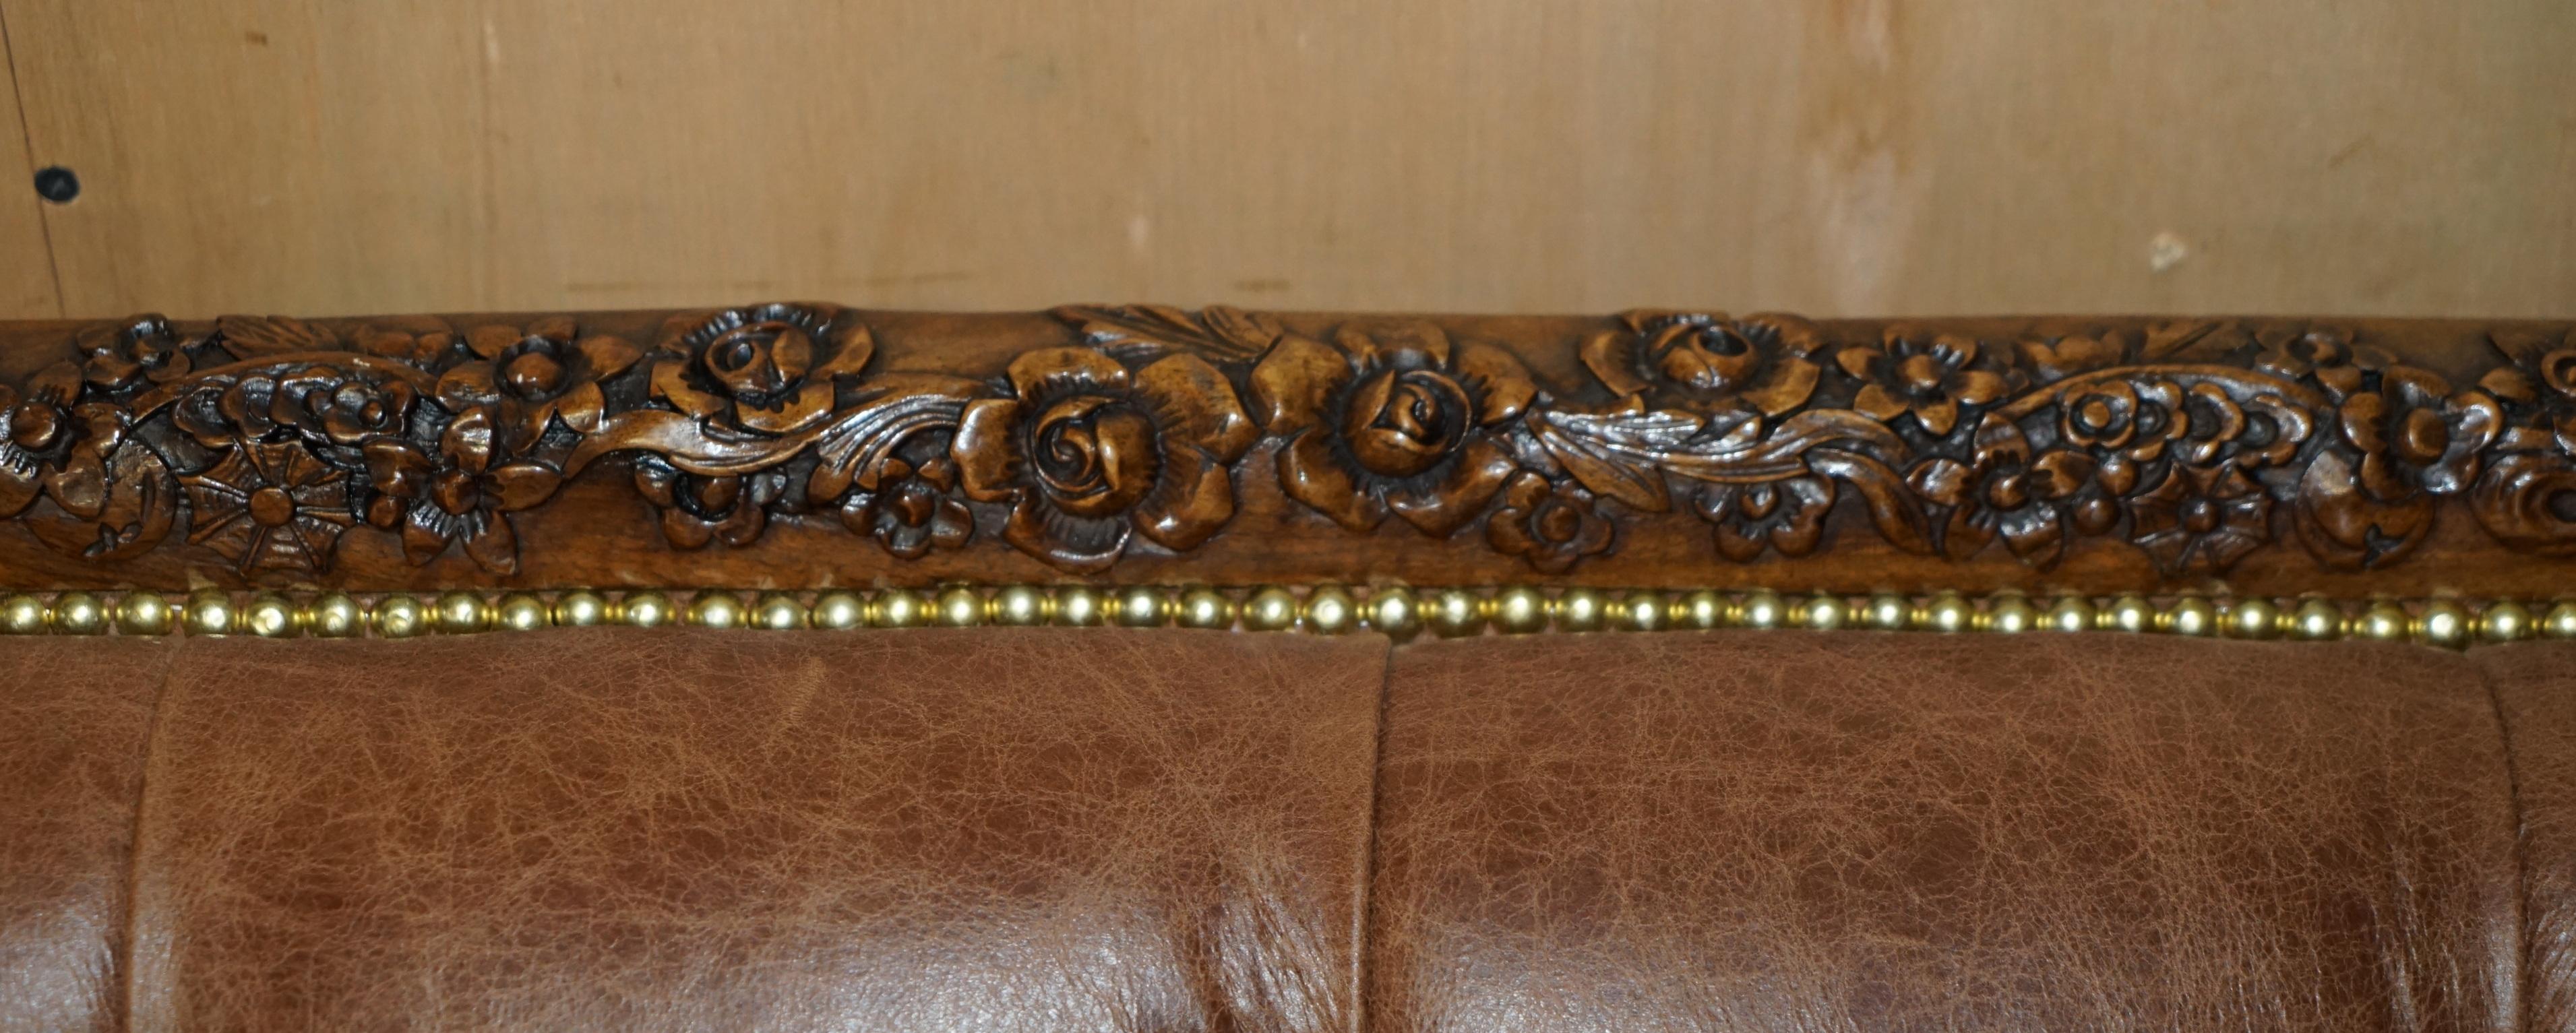 ANTIQUE FULLY RESTORED REGENCY 1810 CHESTERFiELD SOFA BROWN LEATHER CARVED FRAME For Sale 1